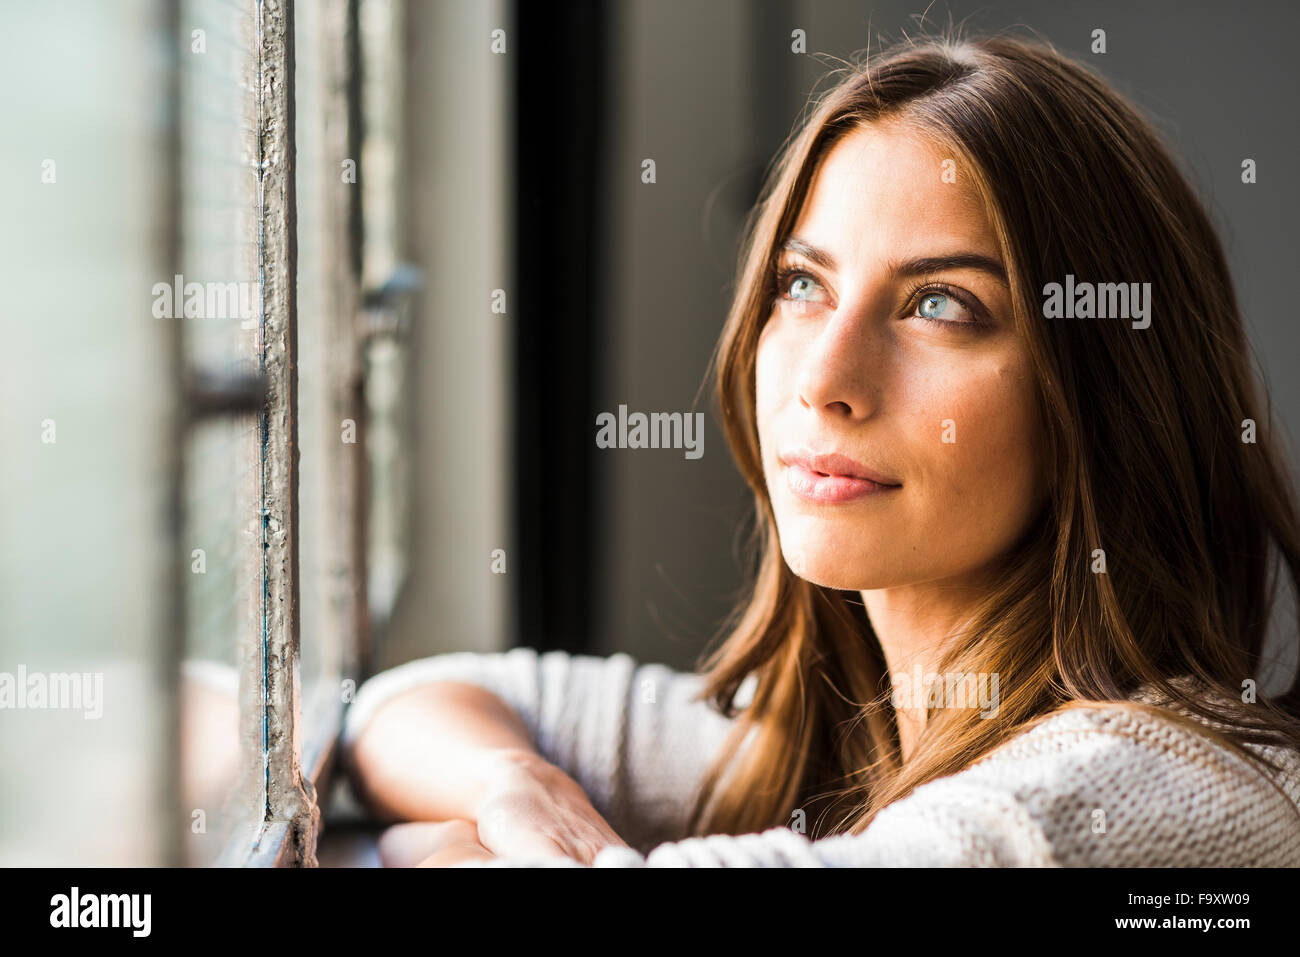 Brunette woman looking out of window Banque D'Images